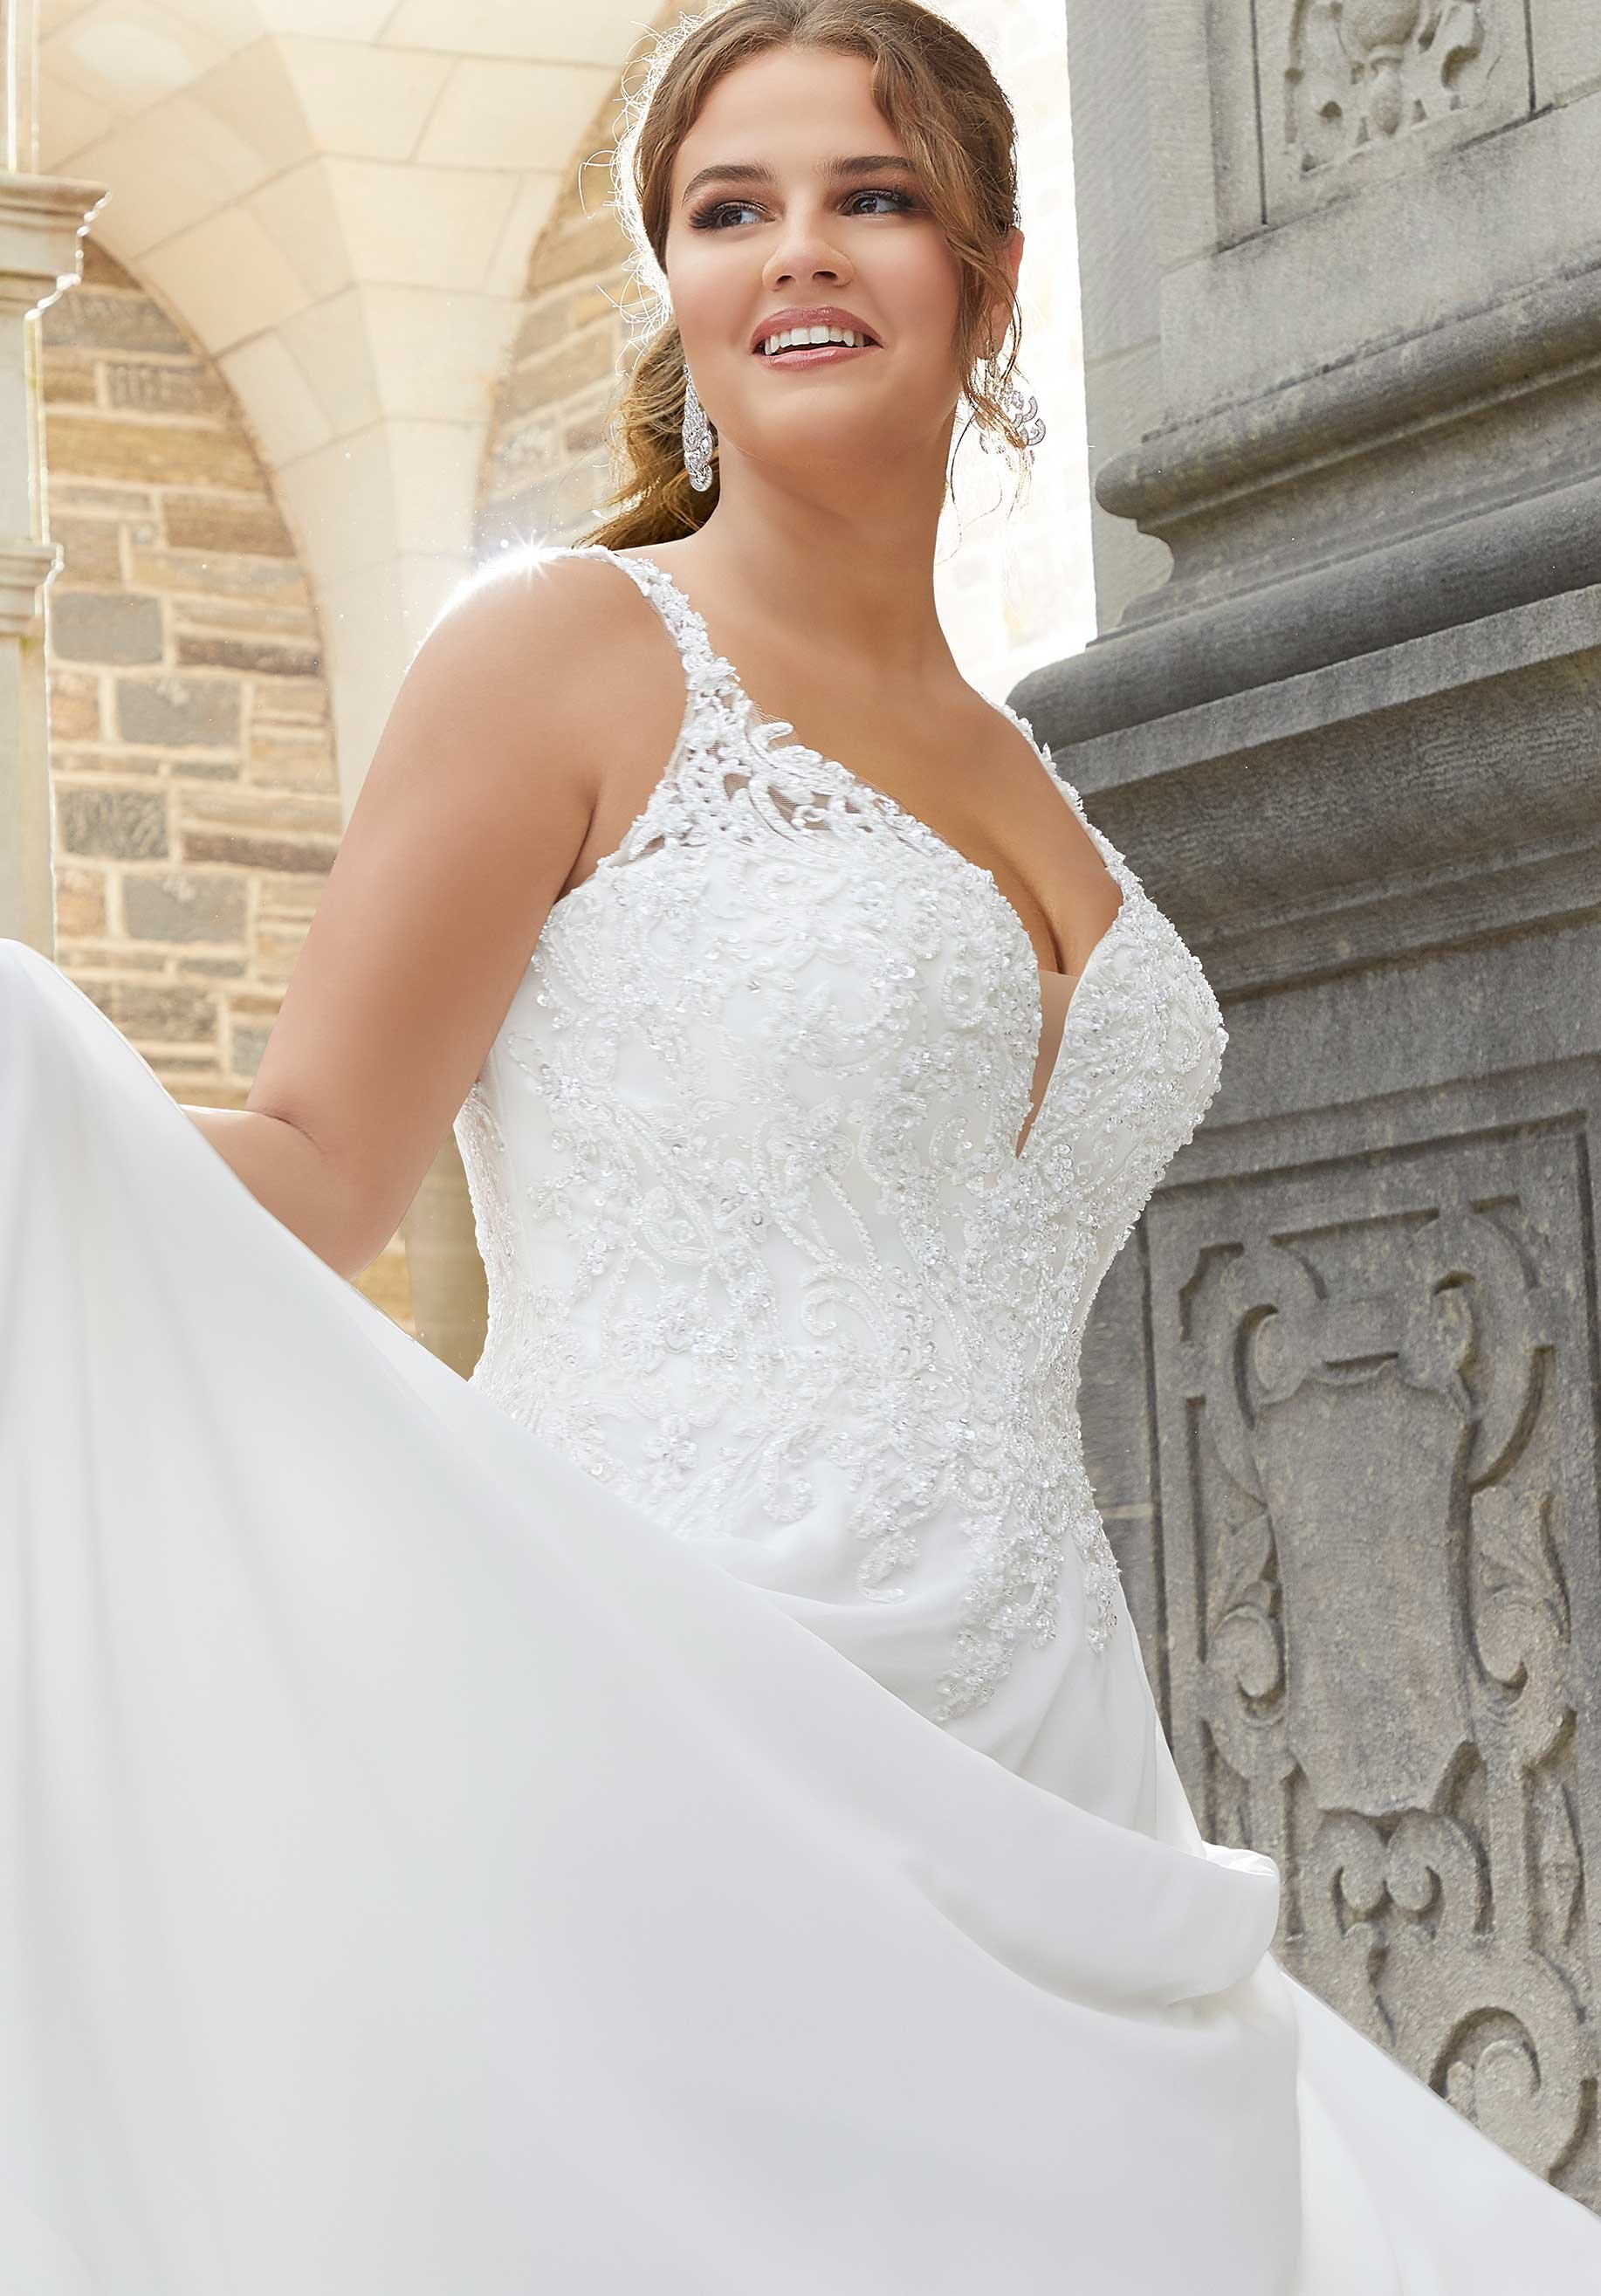 Brides-by-Young-Curvy-Plus-Size-Bridal-Chicago-Illinois-Indianapolis-Indiana-New-Jersey-Morilee-3282-Sylvia-Close-Up.jpg